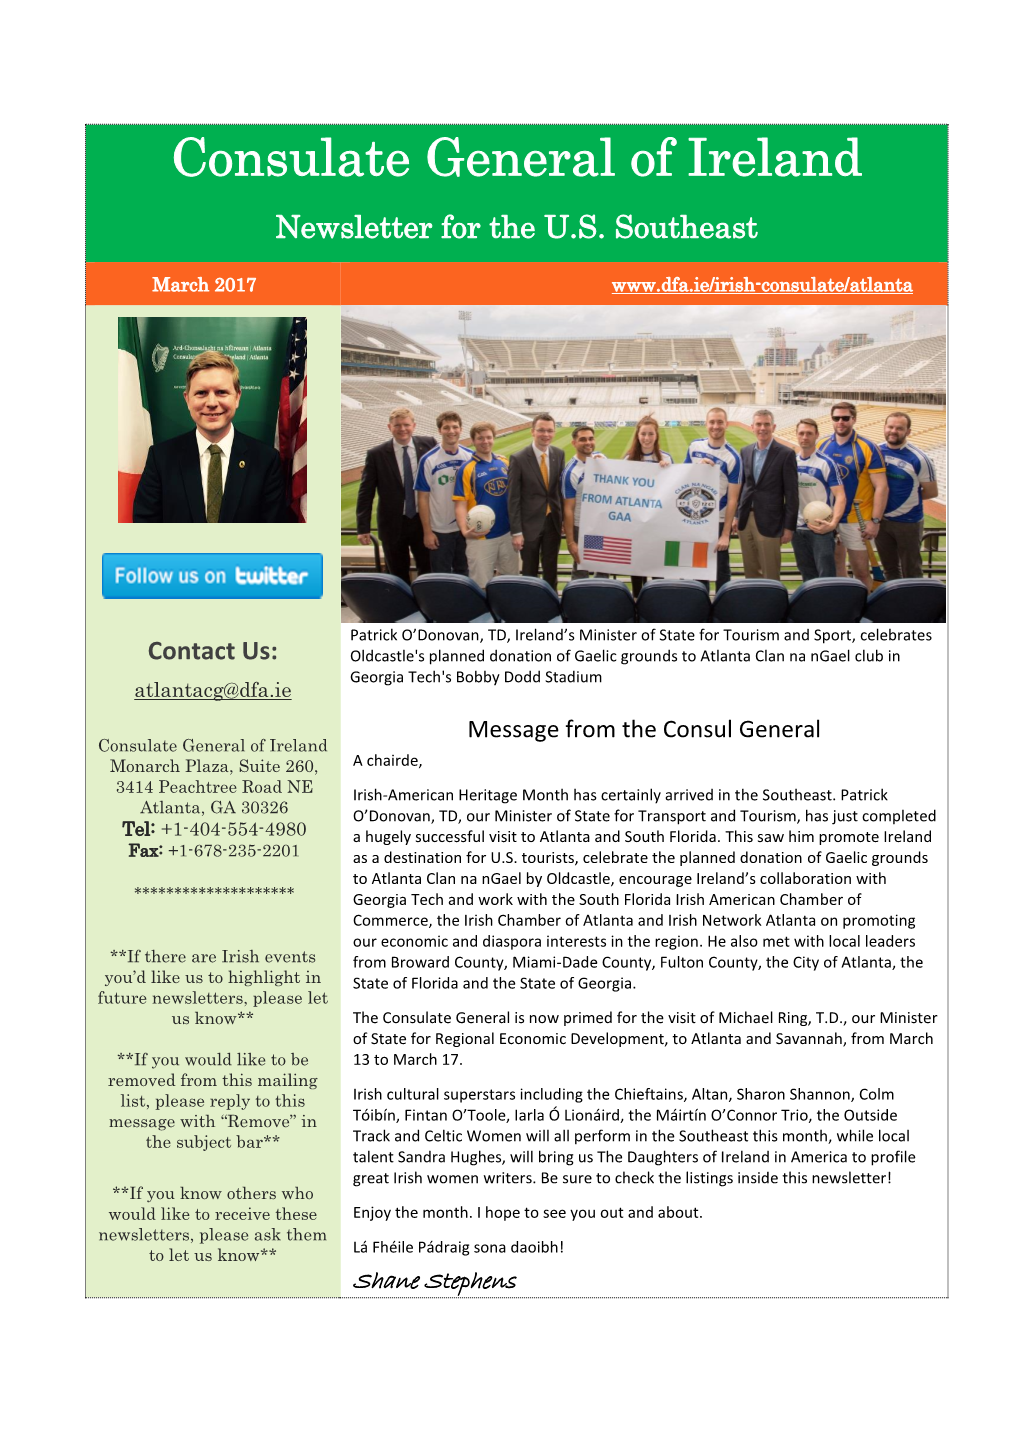 Consulate General of Ireland Newsletter for the U.S